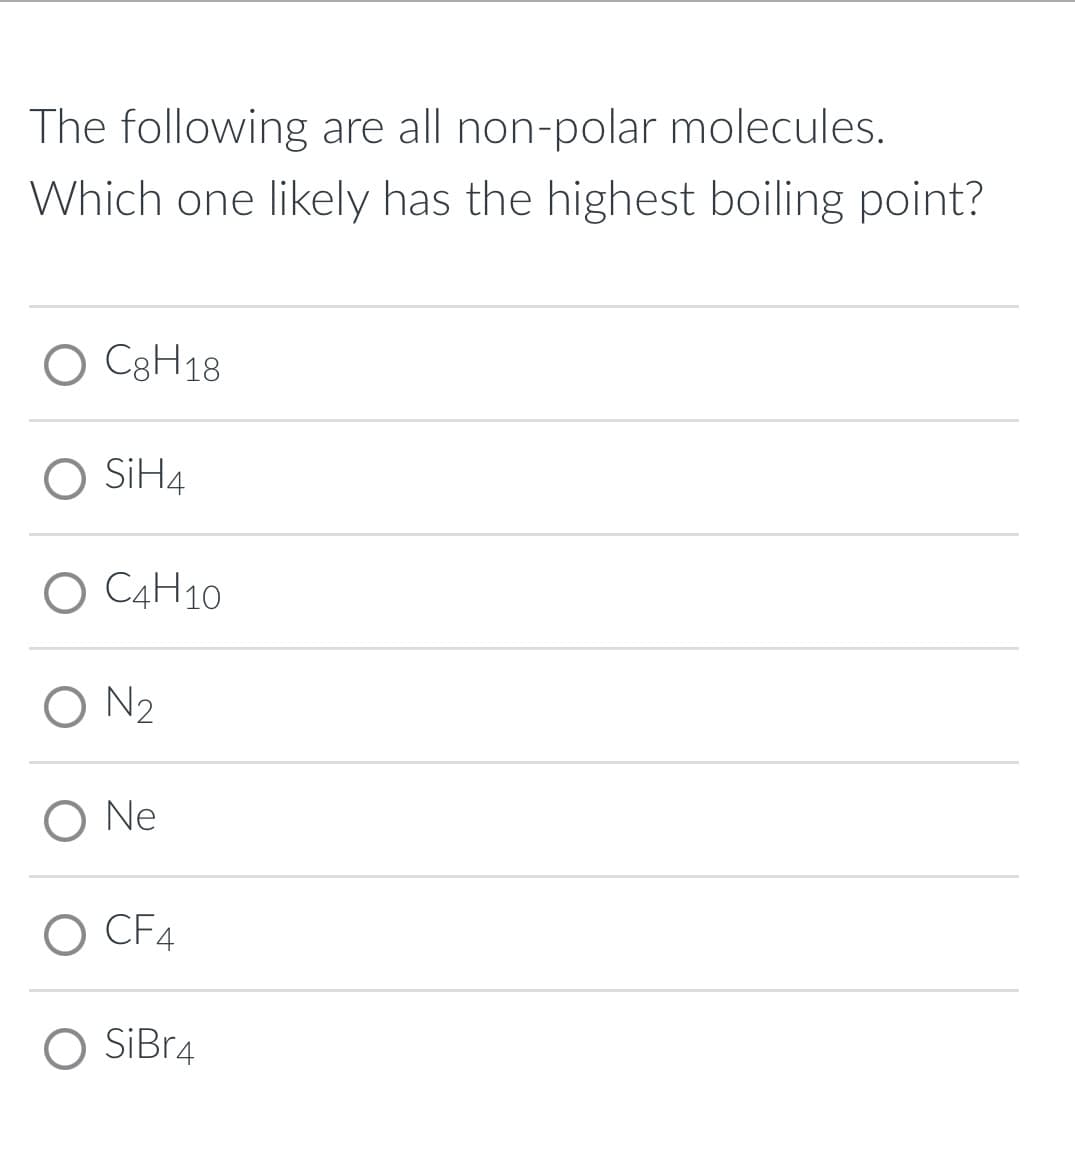 The following are all non-polar molecules.
Which one likely has the highest boiling point?
O C3H18
O SİH4
O C4H10
O N2
Ne
O CF4
SiBr4
